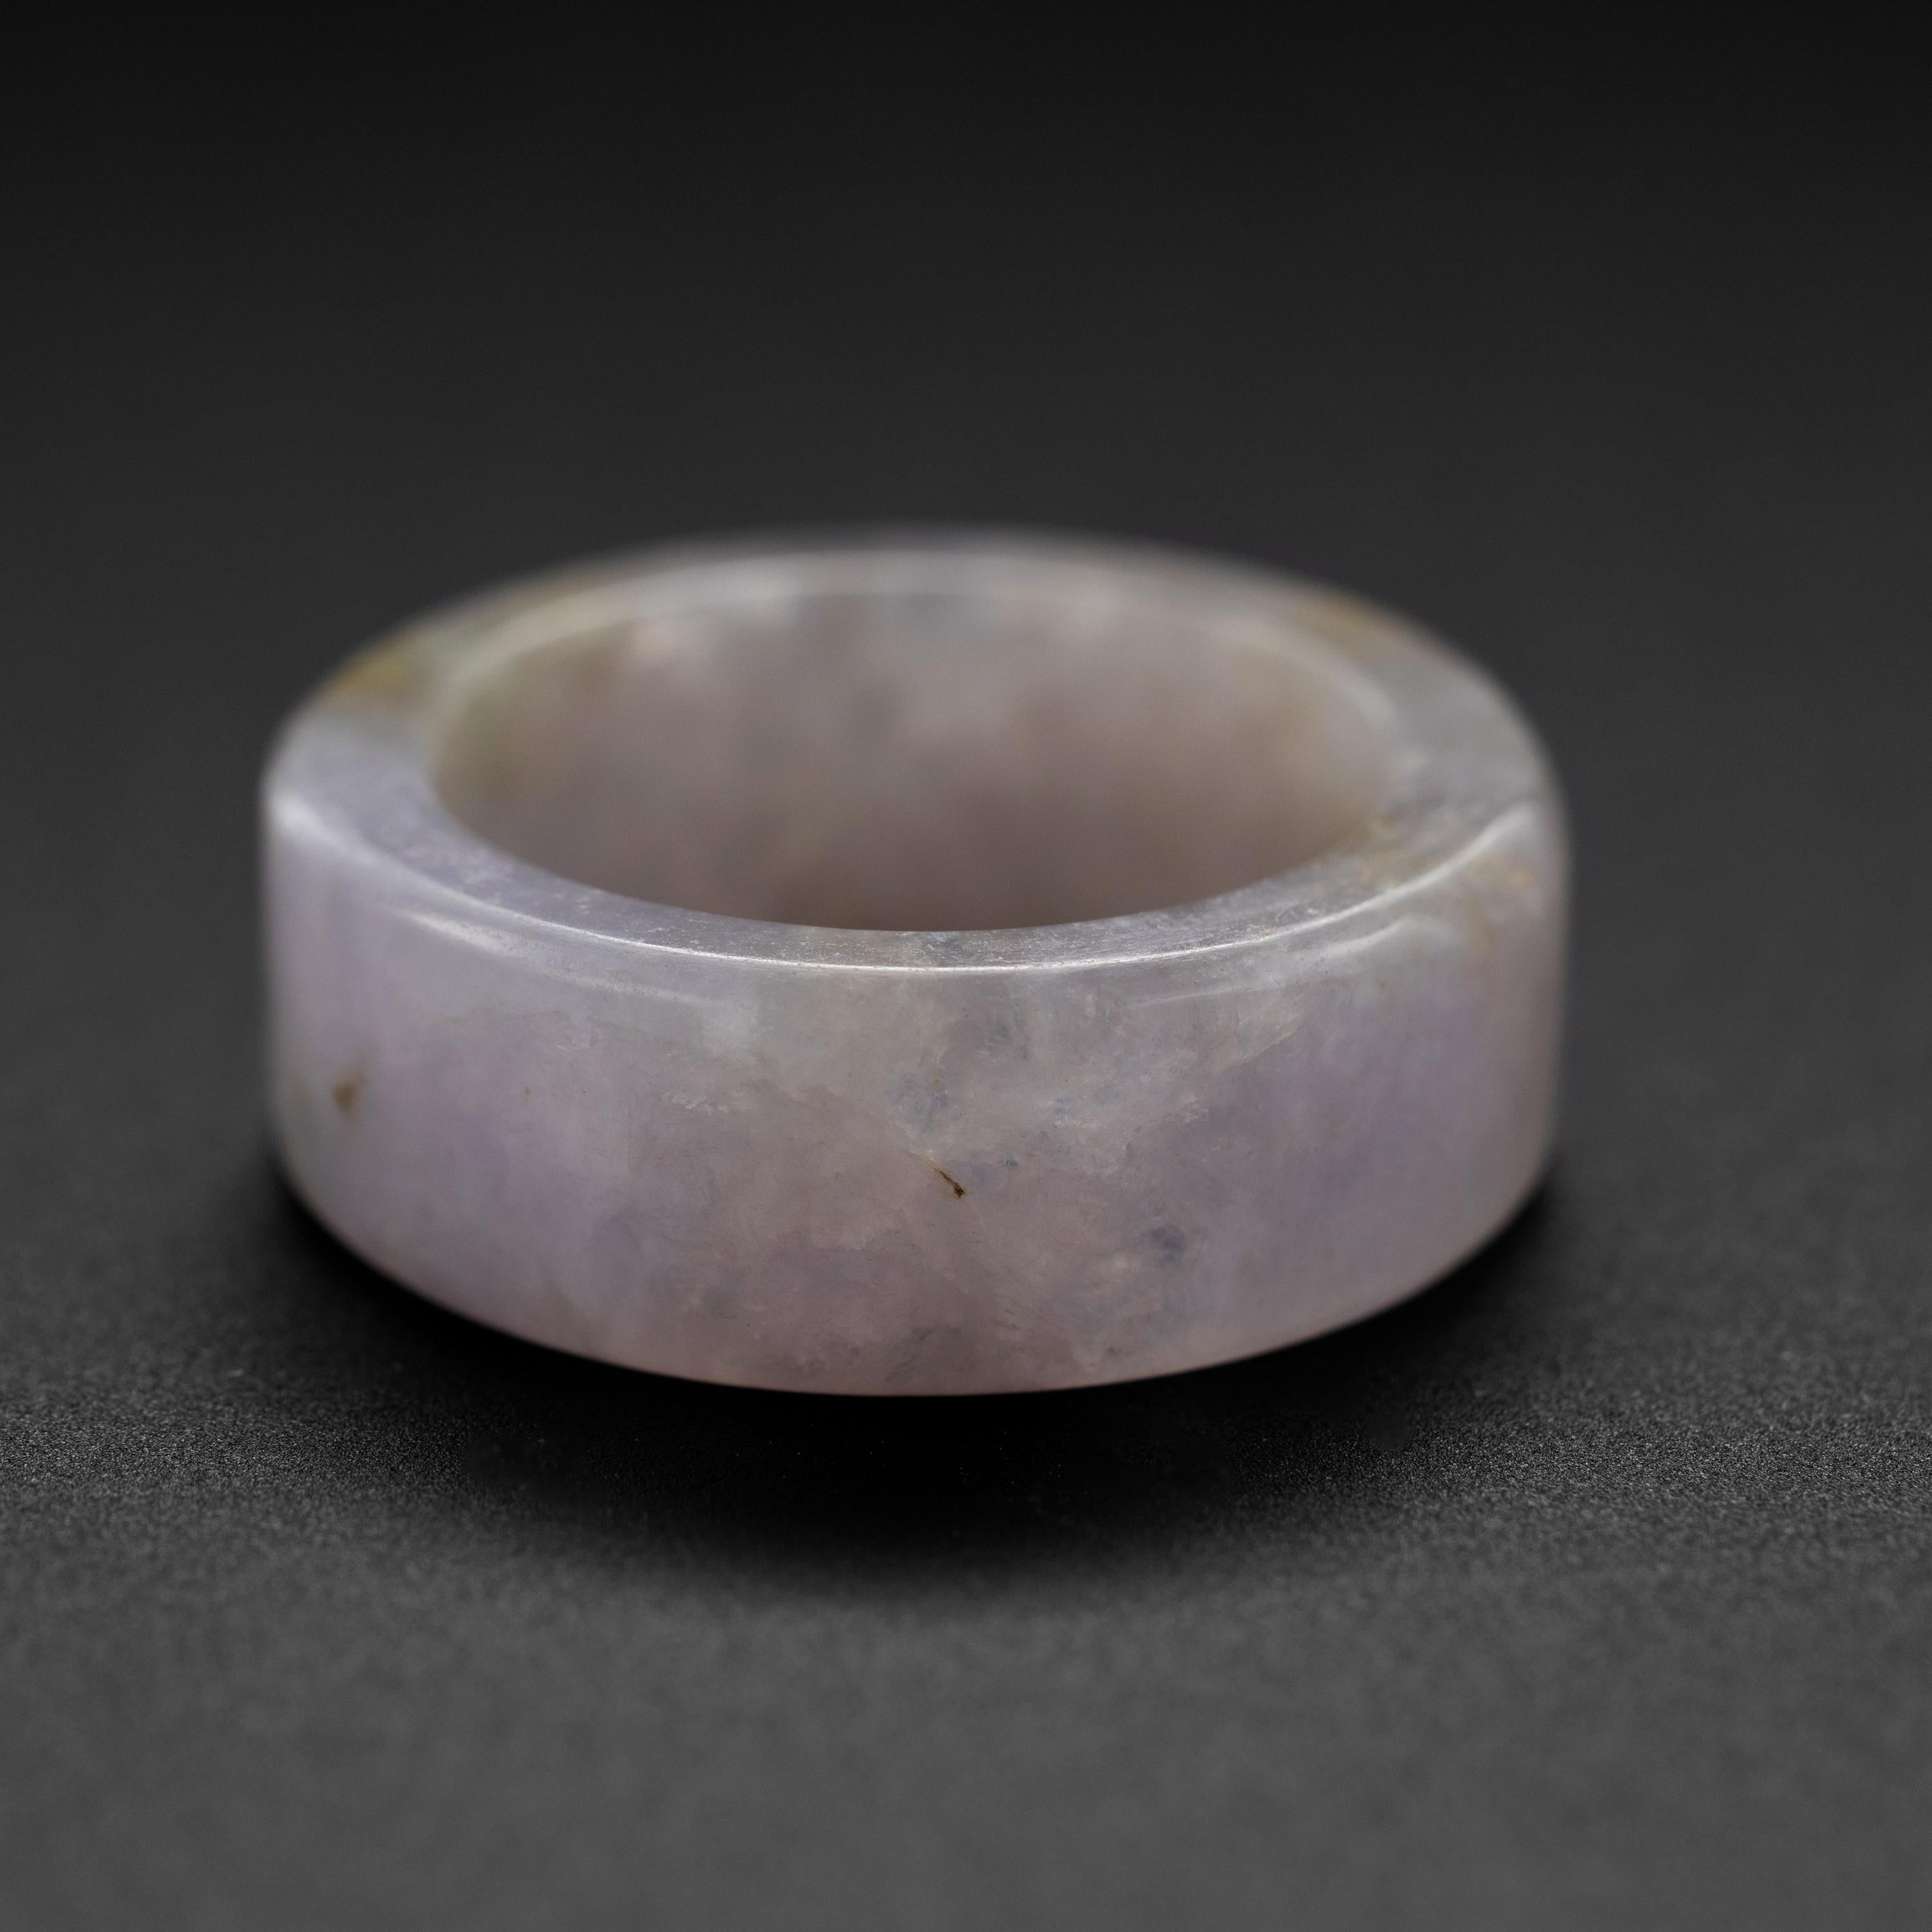 The straight lines and uniform spherical shape make this hand-carved lavender jade ring unique. The vast majority of rings carved from a single piece of jade are contoured more like the profile of a wedding band: convex, or else they are carved in